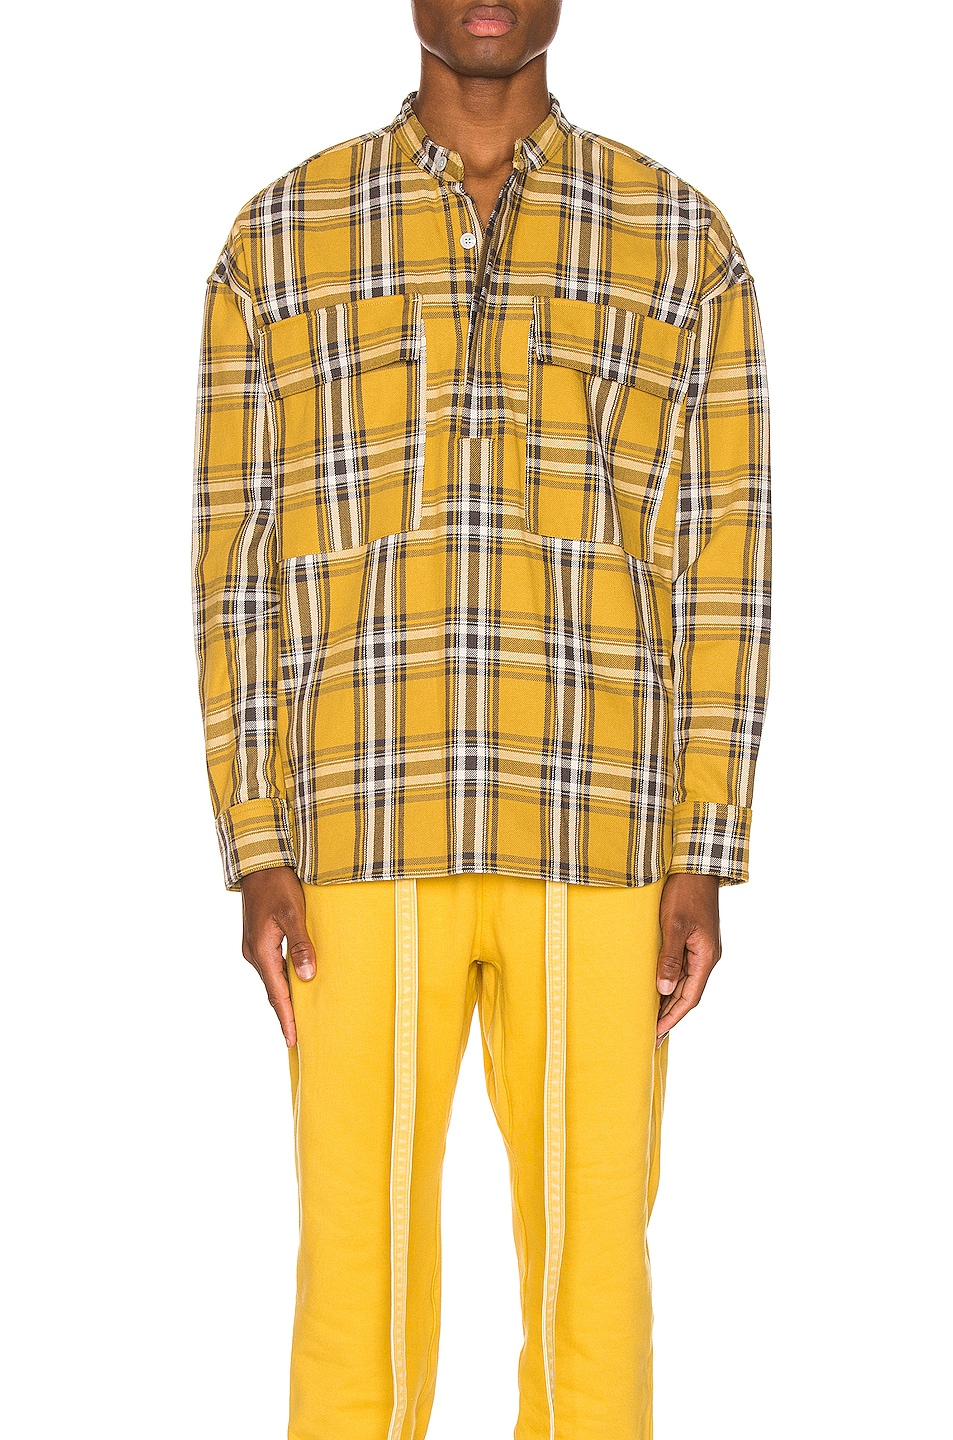 Image 1 of Fear of God Plaid Pullover Henley in Garden Glove Yellow in Garden Glove Yellow Plaid